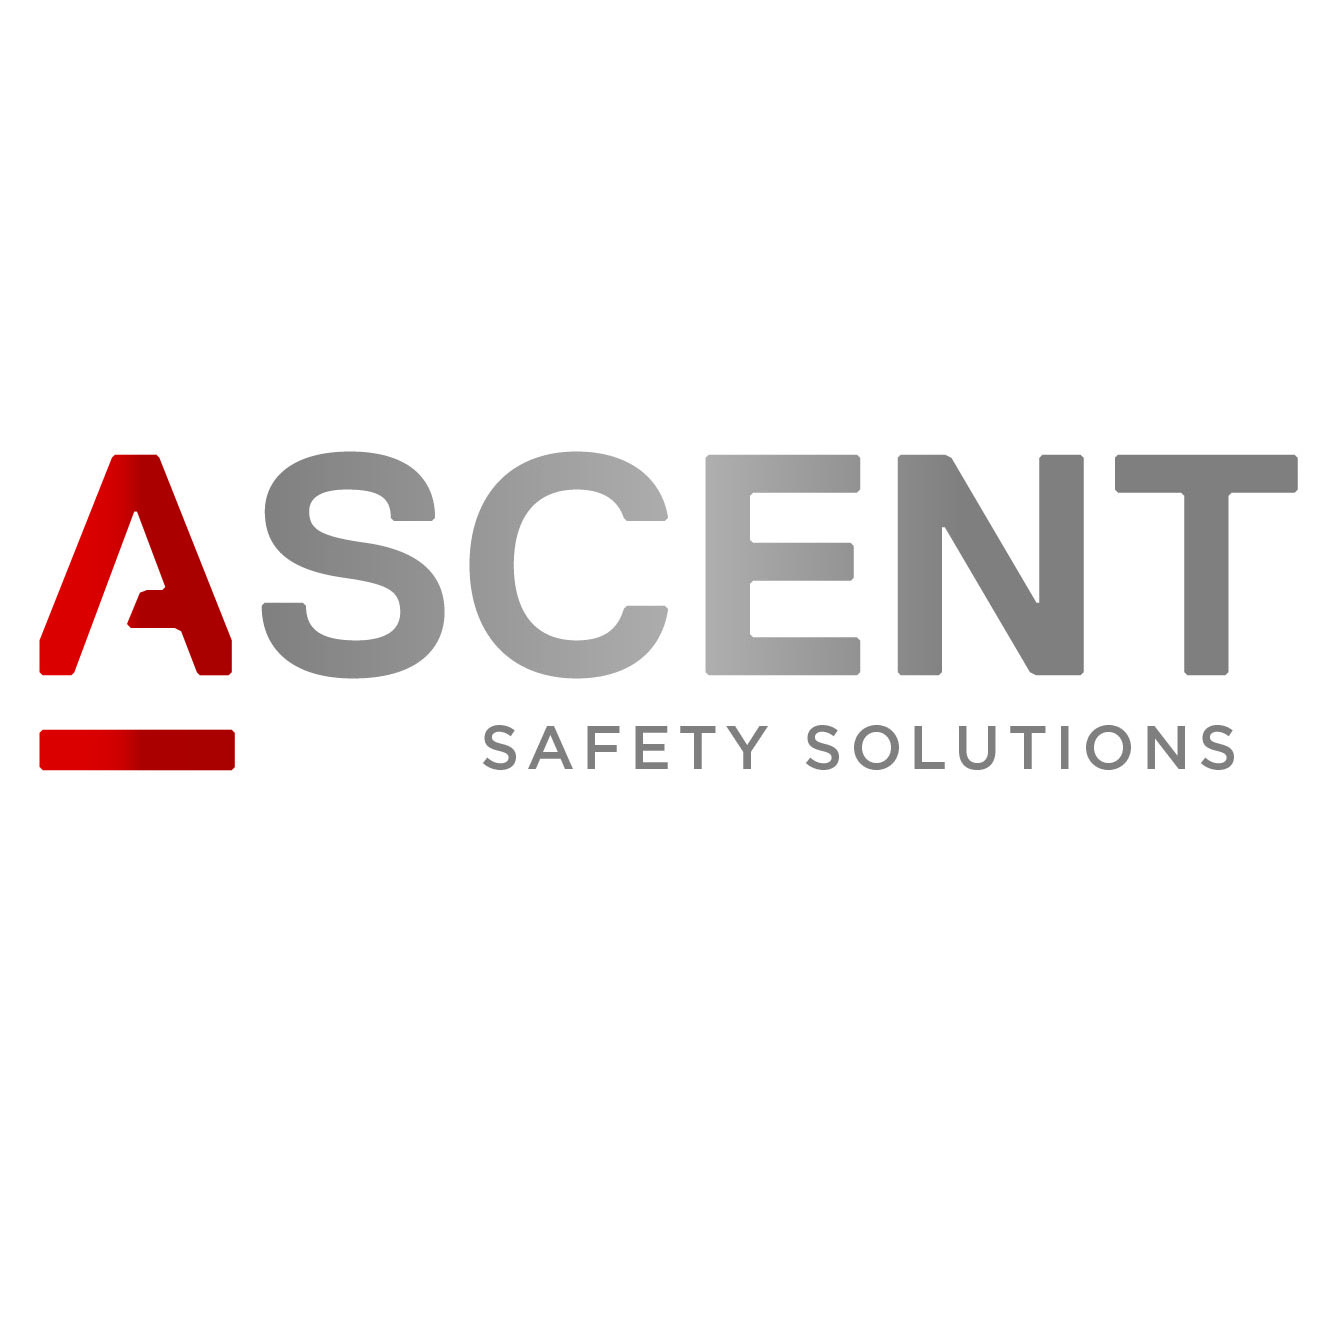 Ascent Safety Solutions